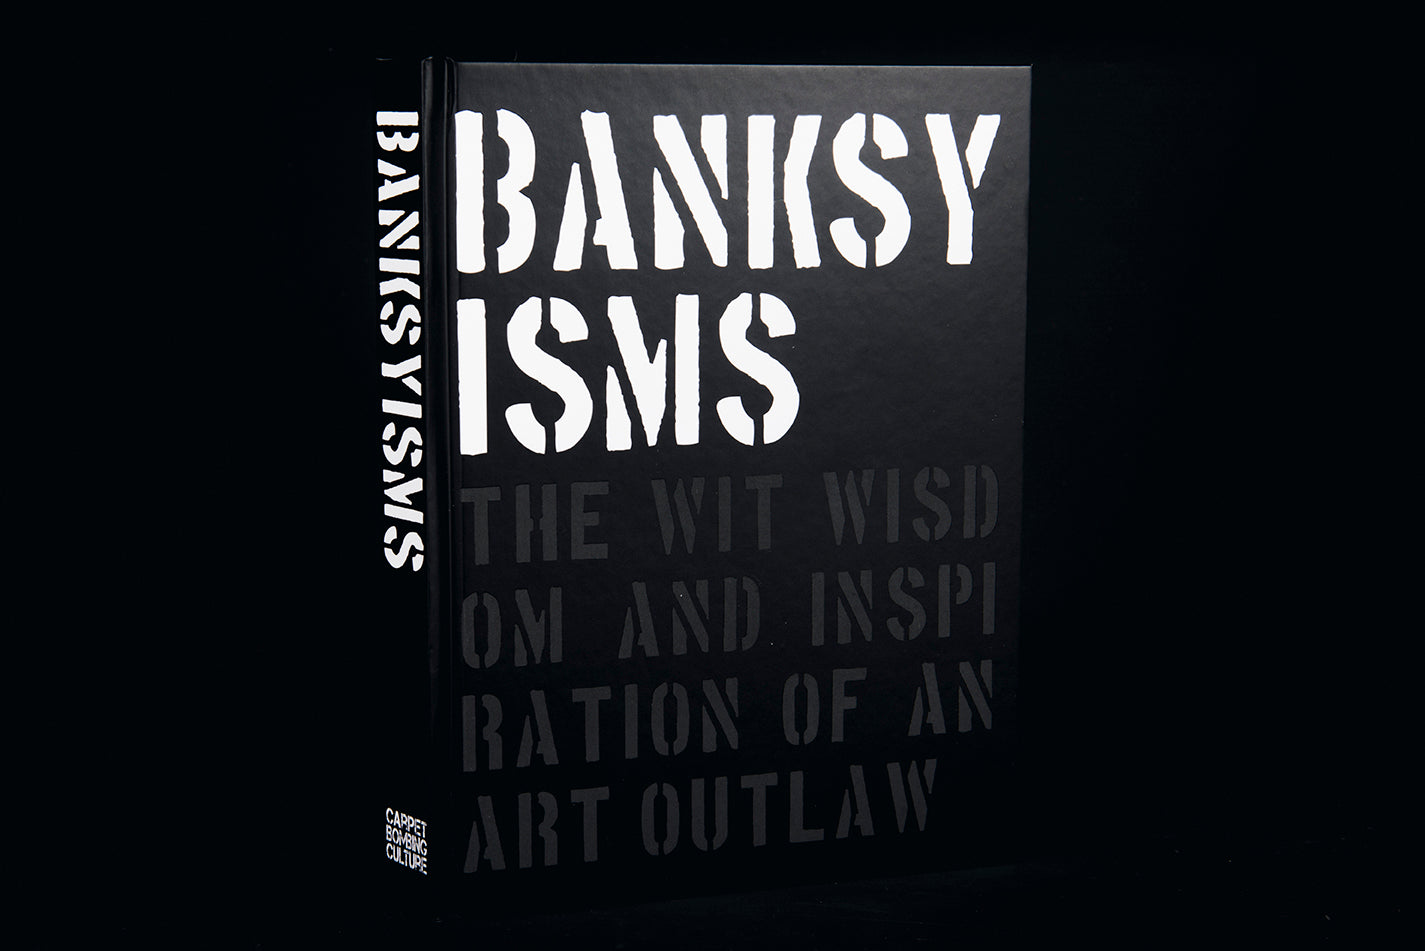 Banksyisms: The Art, Wit, Wisdom and Inspriation of an Art Outlaw